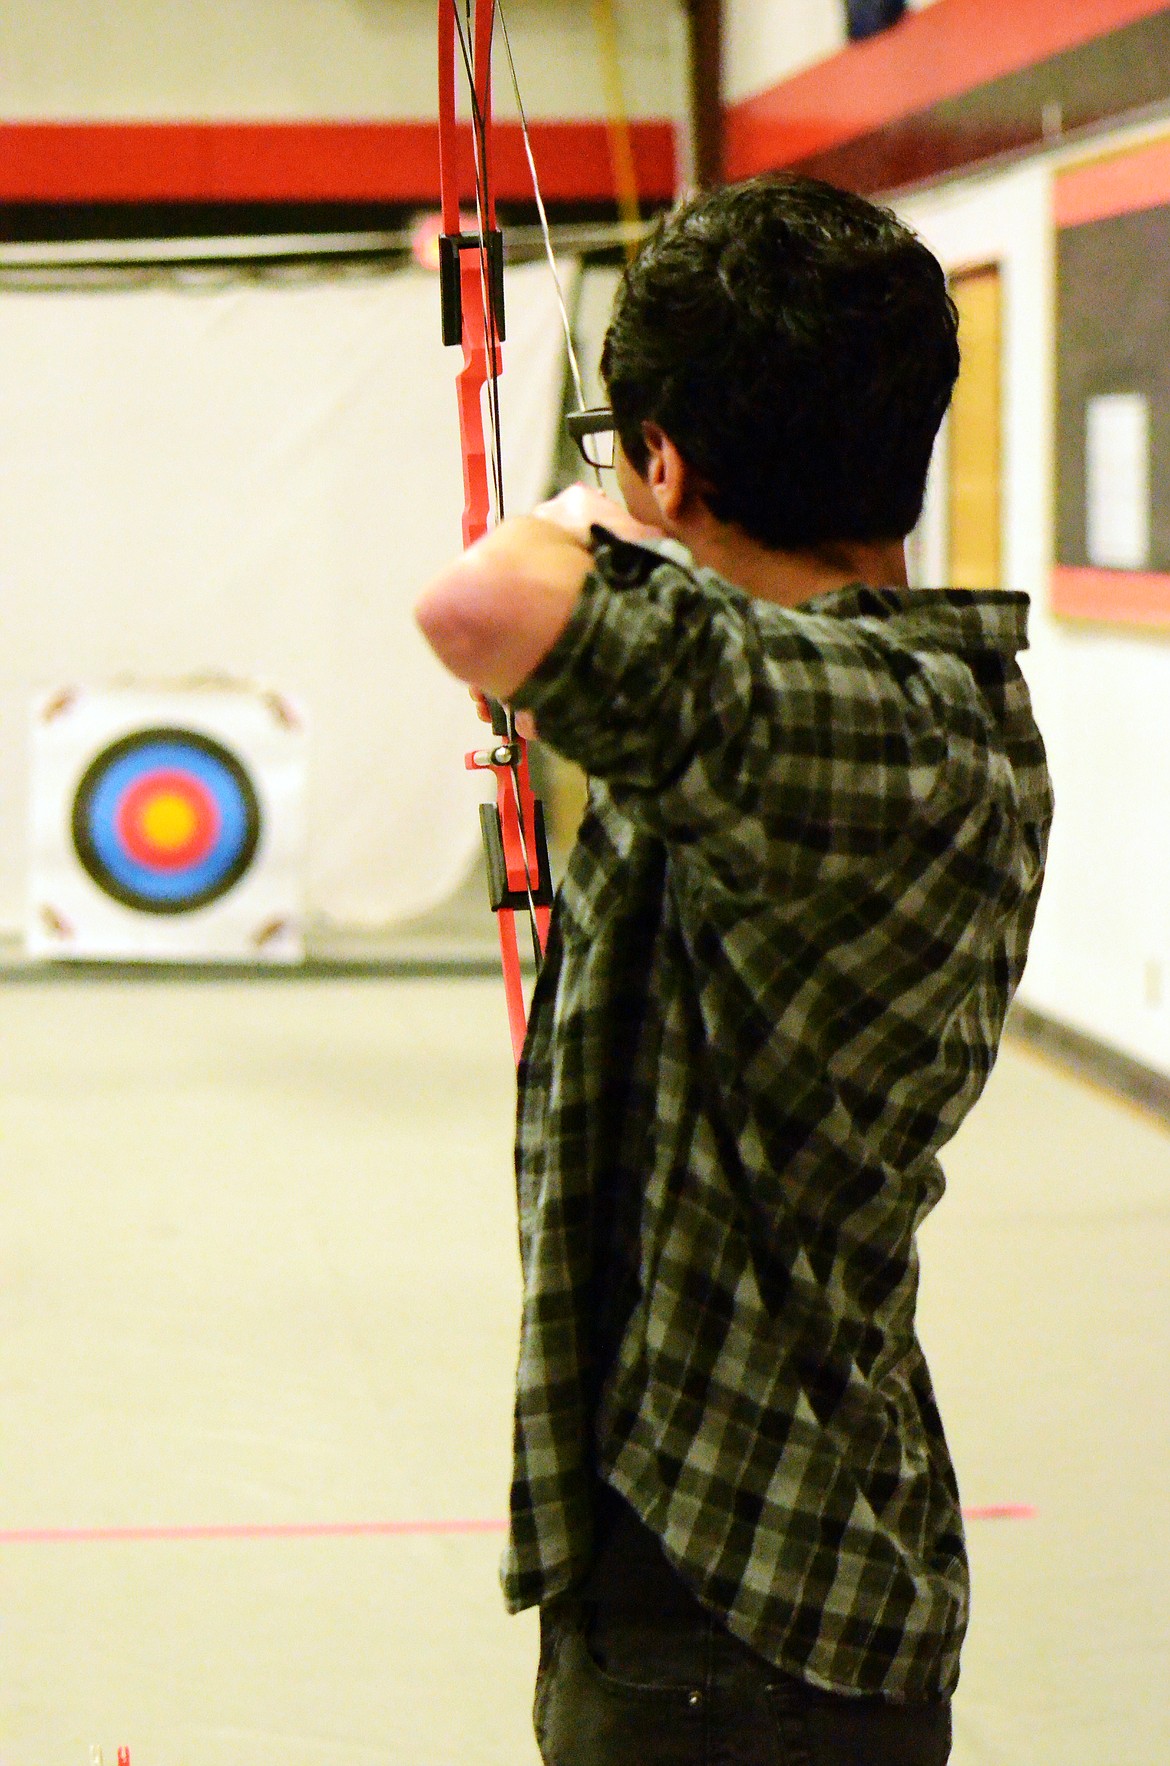 Anjel Martinez of Plains takes aim at his target during the weekend event.